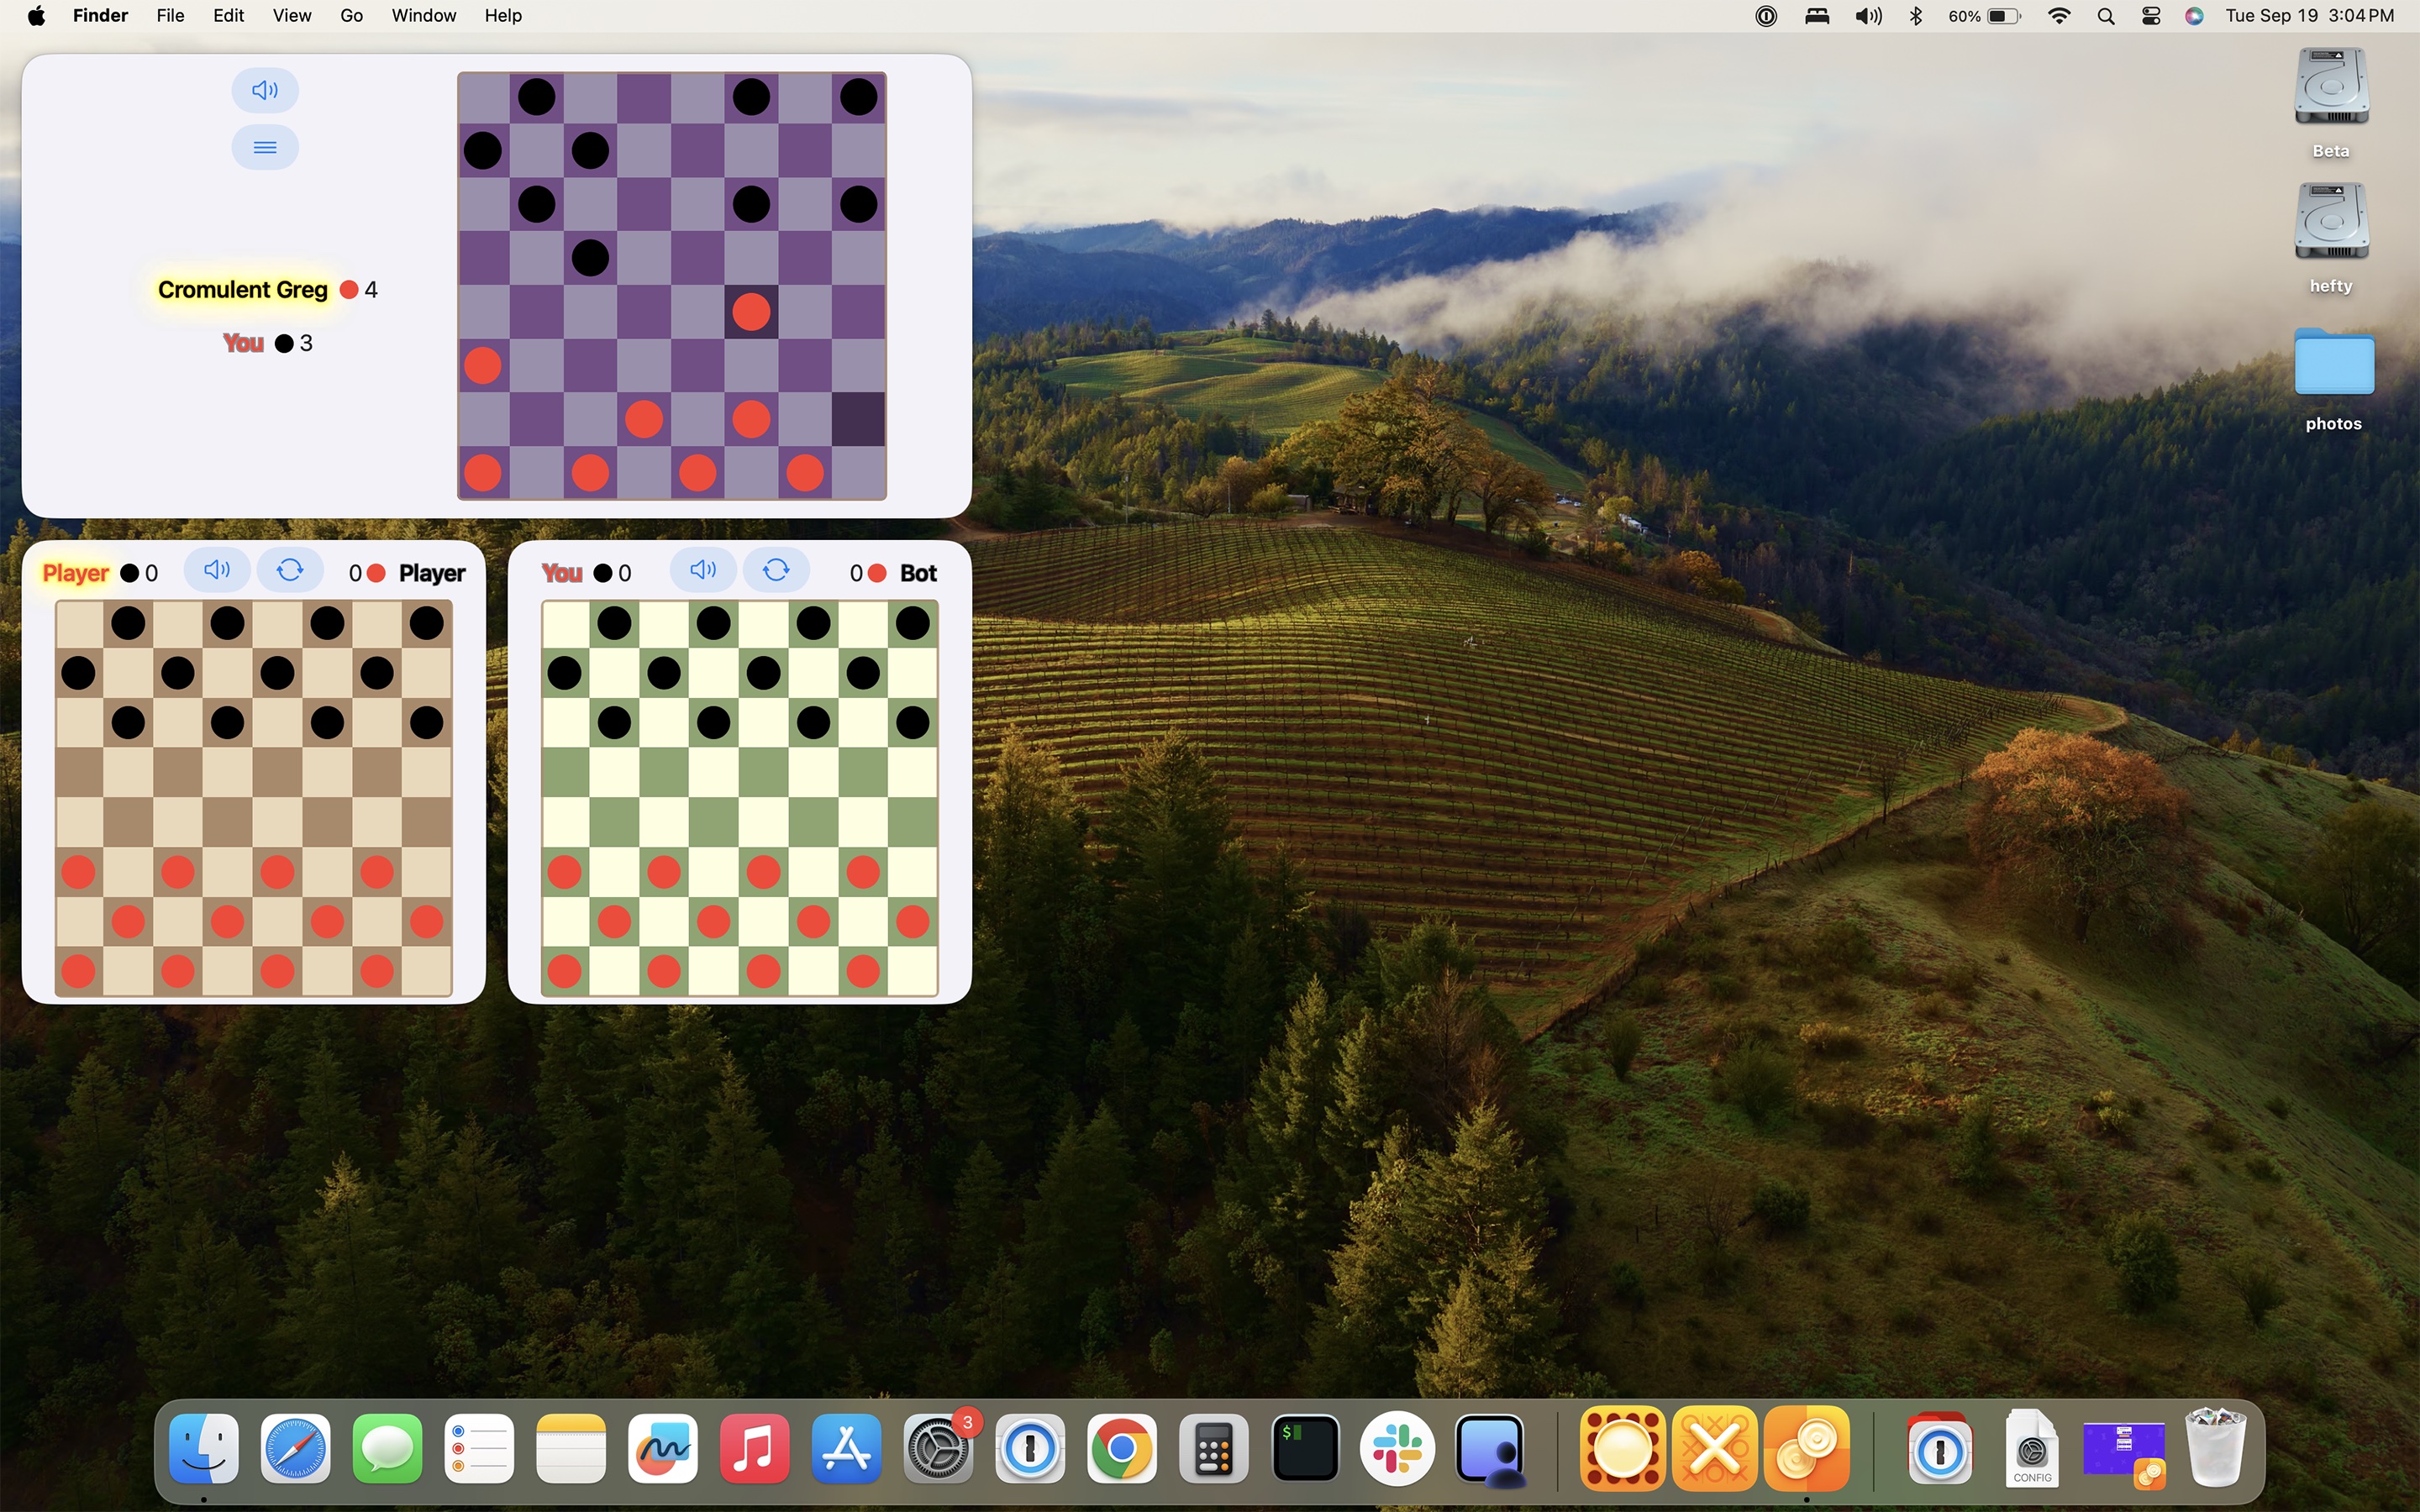 Checkers Widget Game